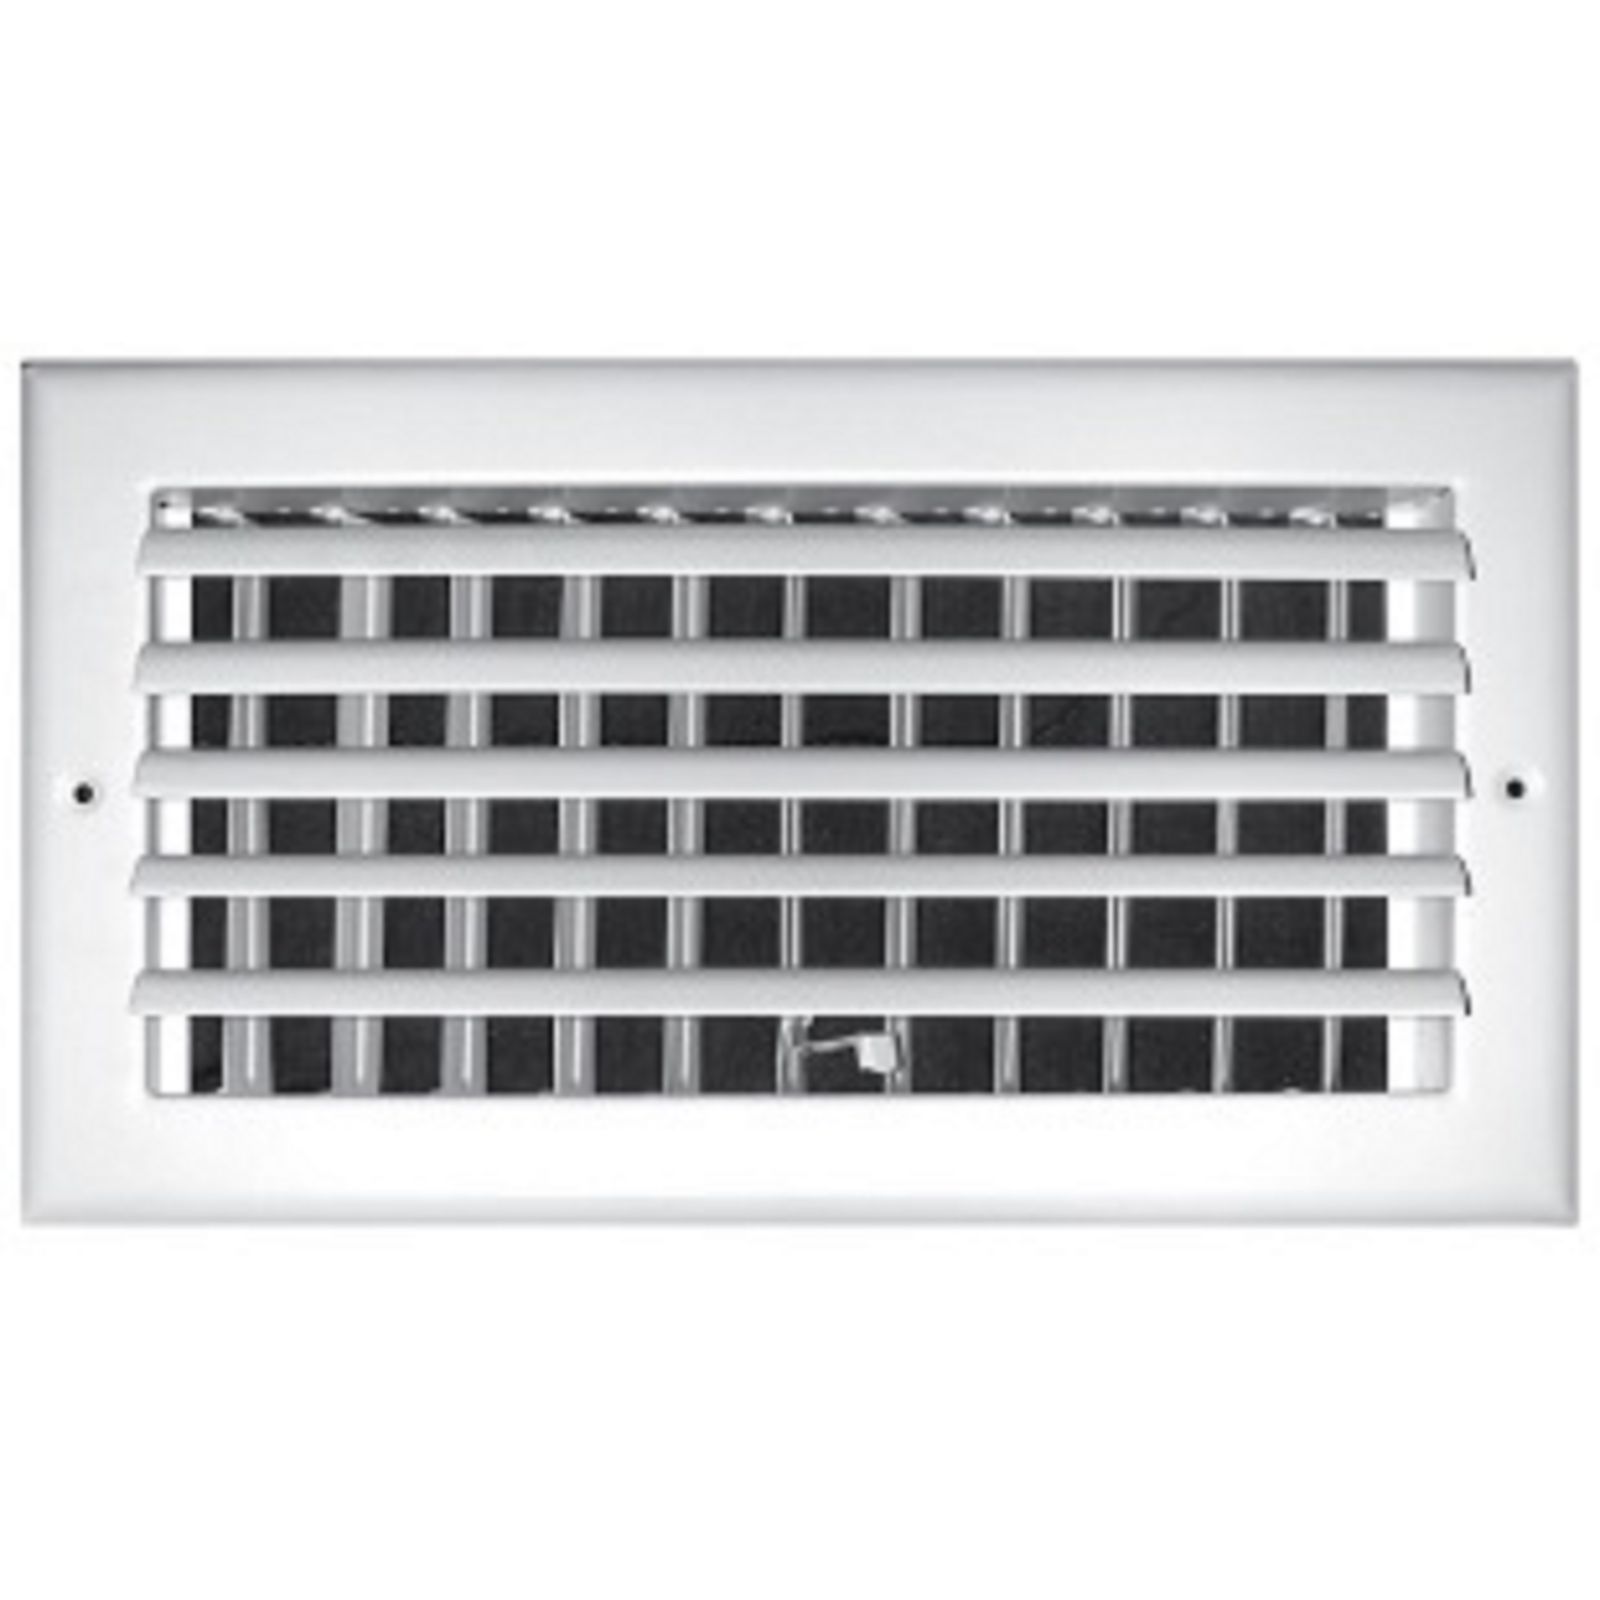 TRUaire 301M 14X08 - Steel Adjustable Curved Blade Wall/Ceiling Register With Multi Shutter Damper, 1-Way, White, 14" X 08"